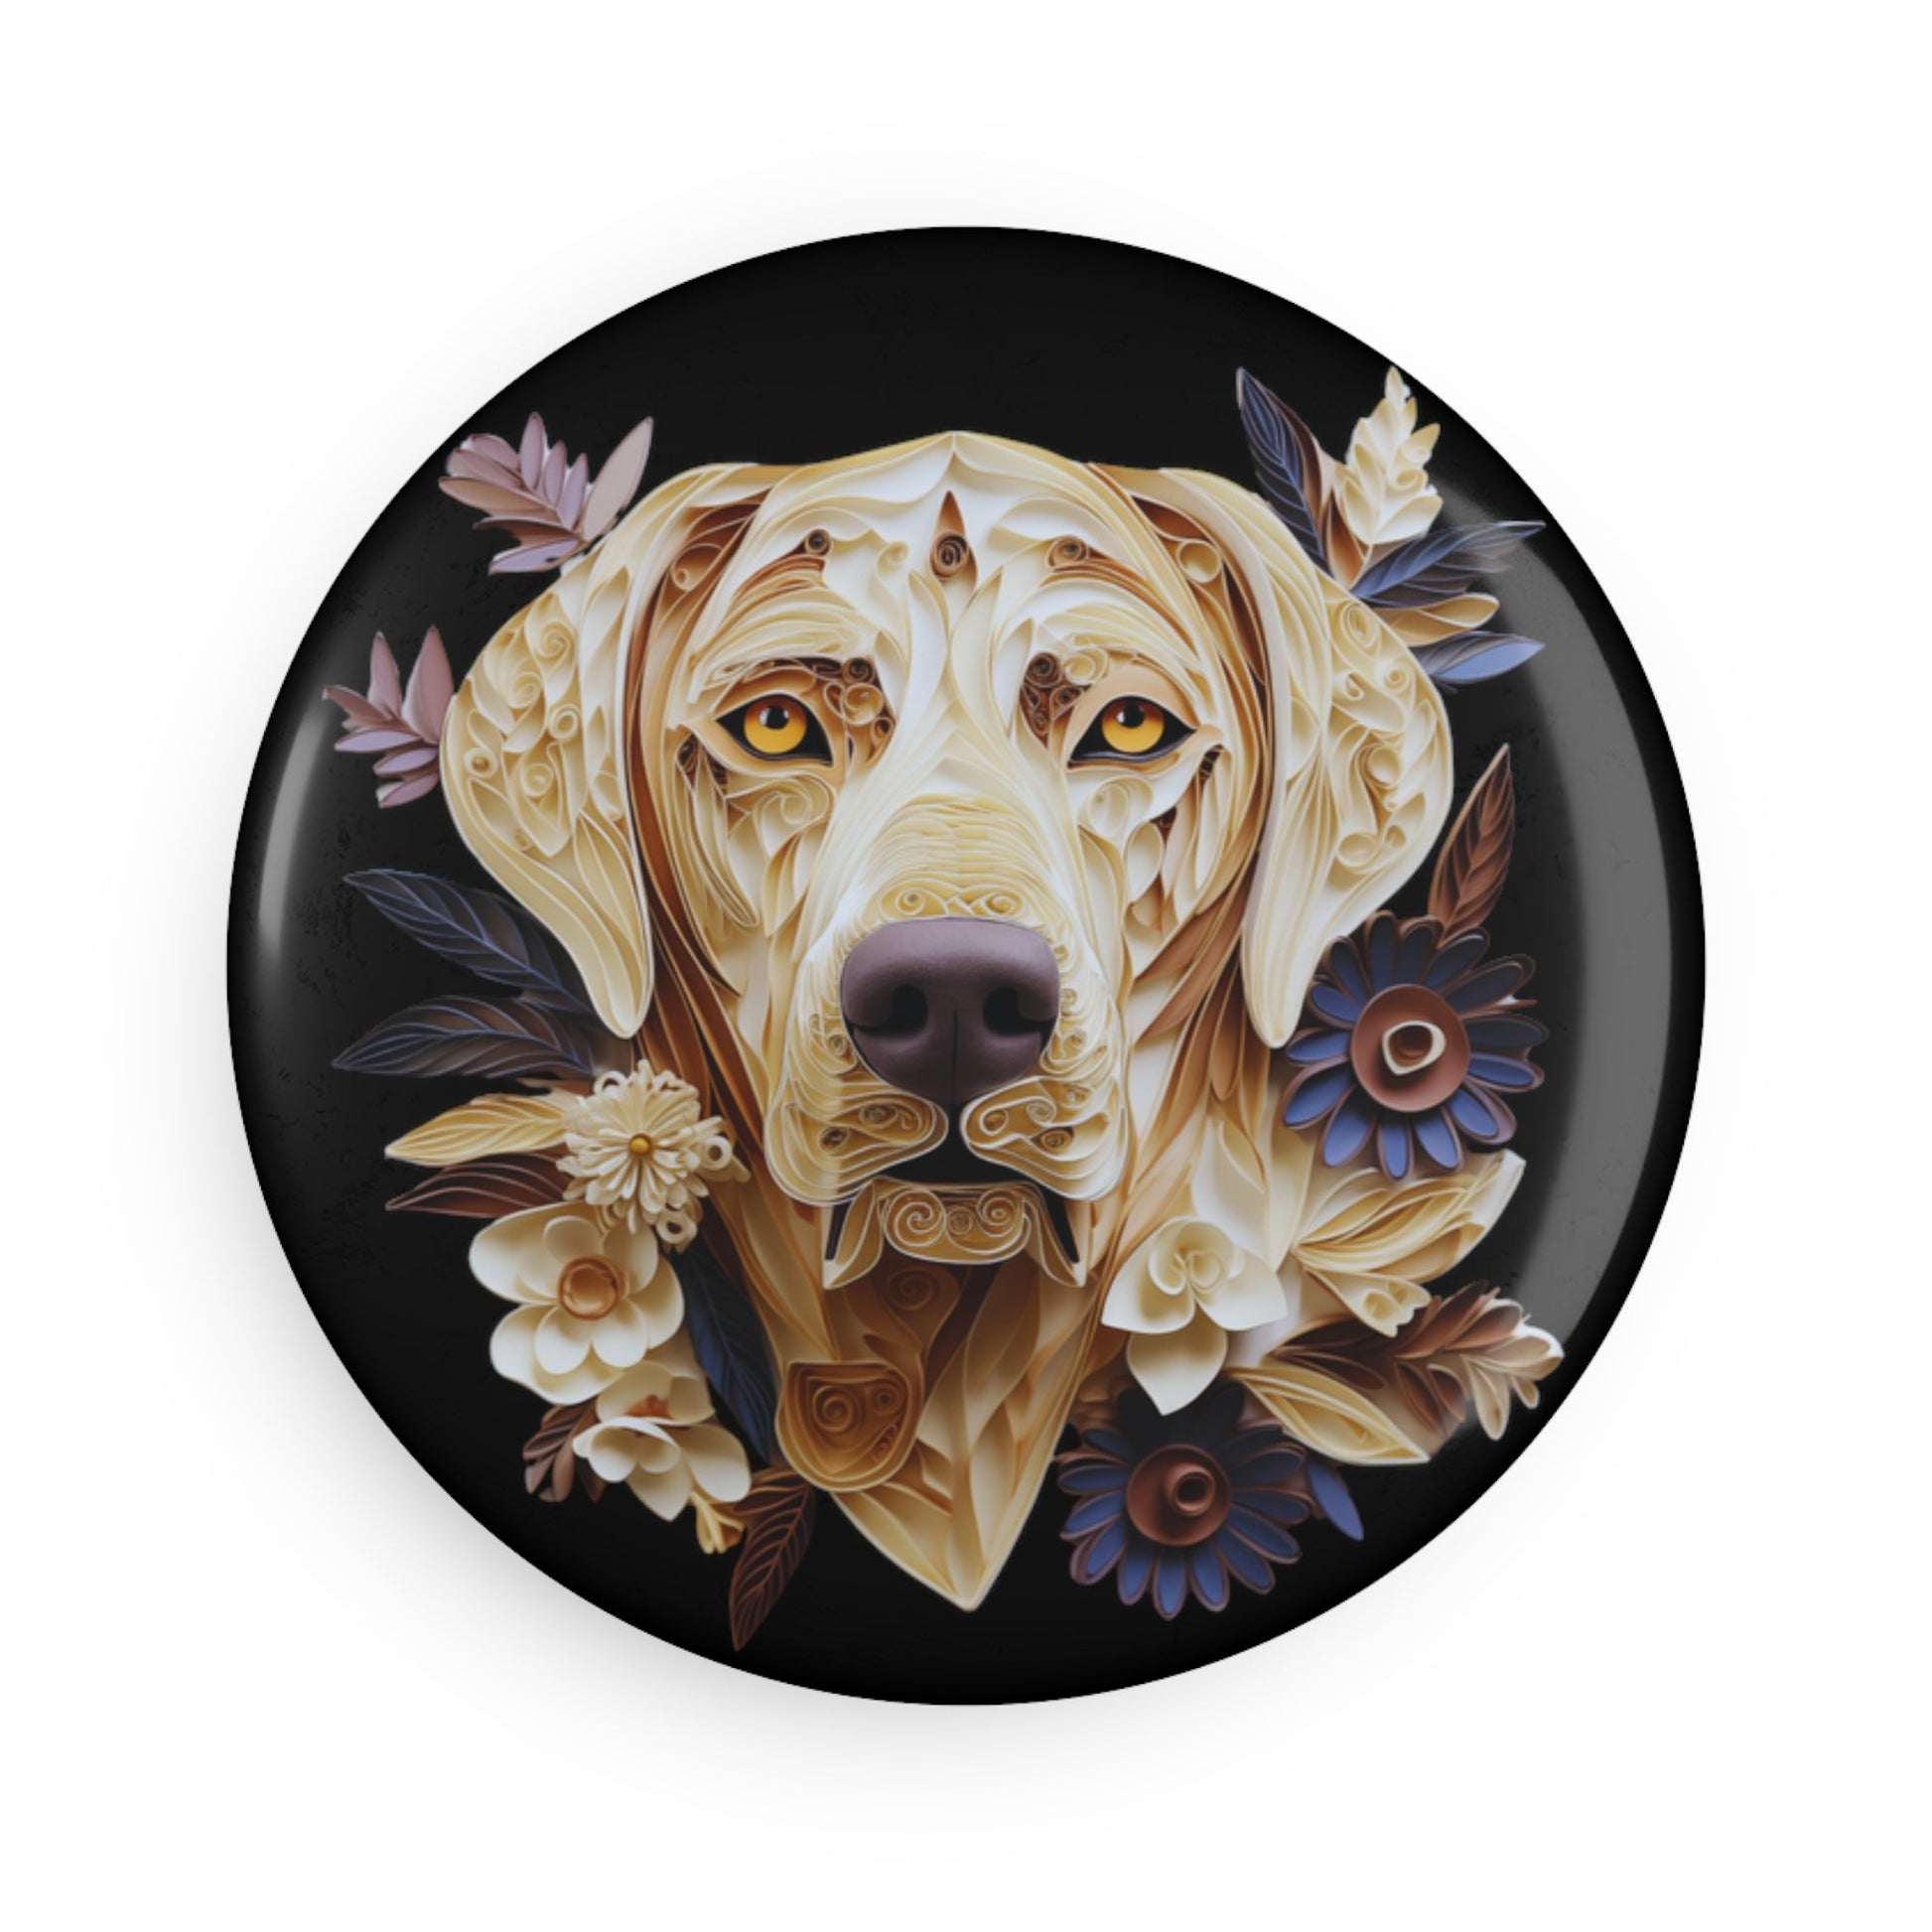 Round Button Fridge Magnet featuring a Labrador Paper Quilling Design [2.25"] - Hobbster